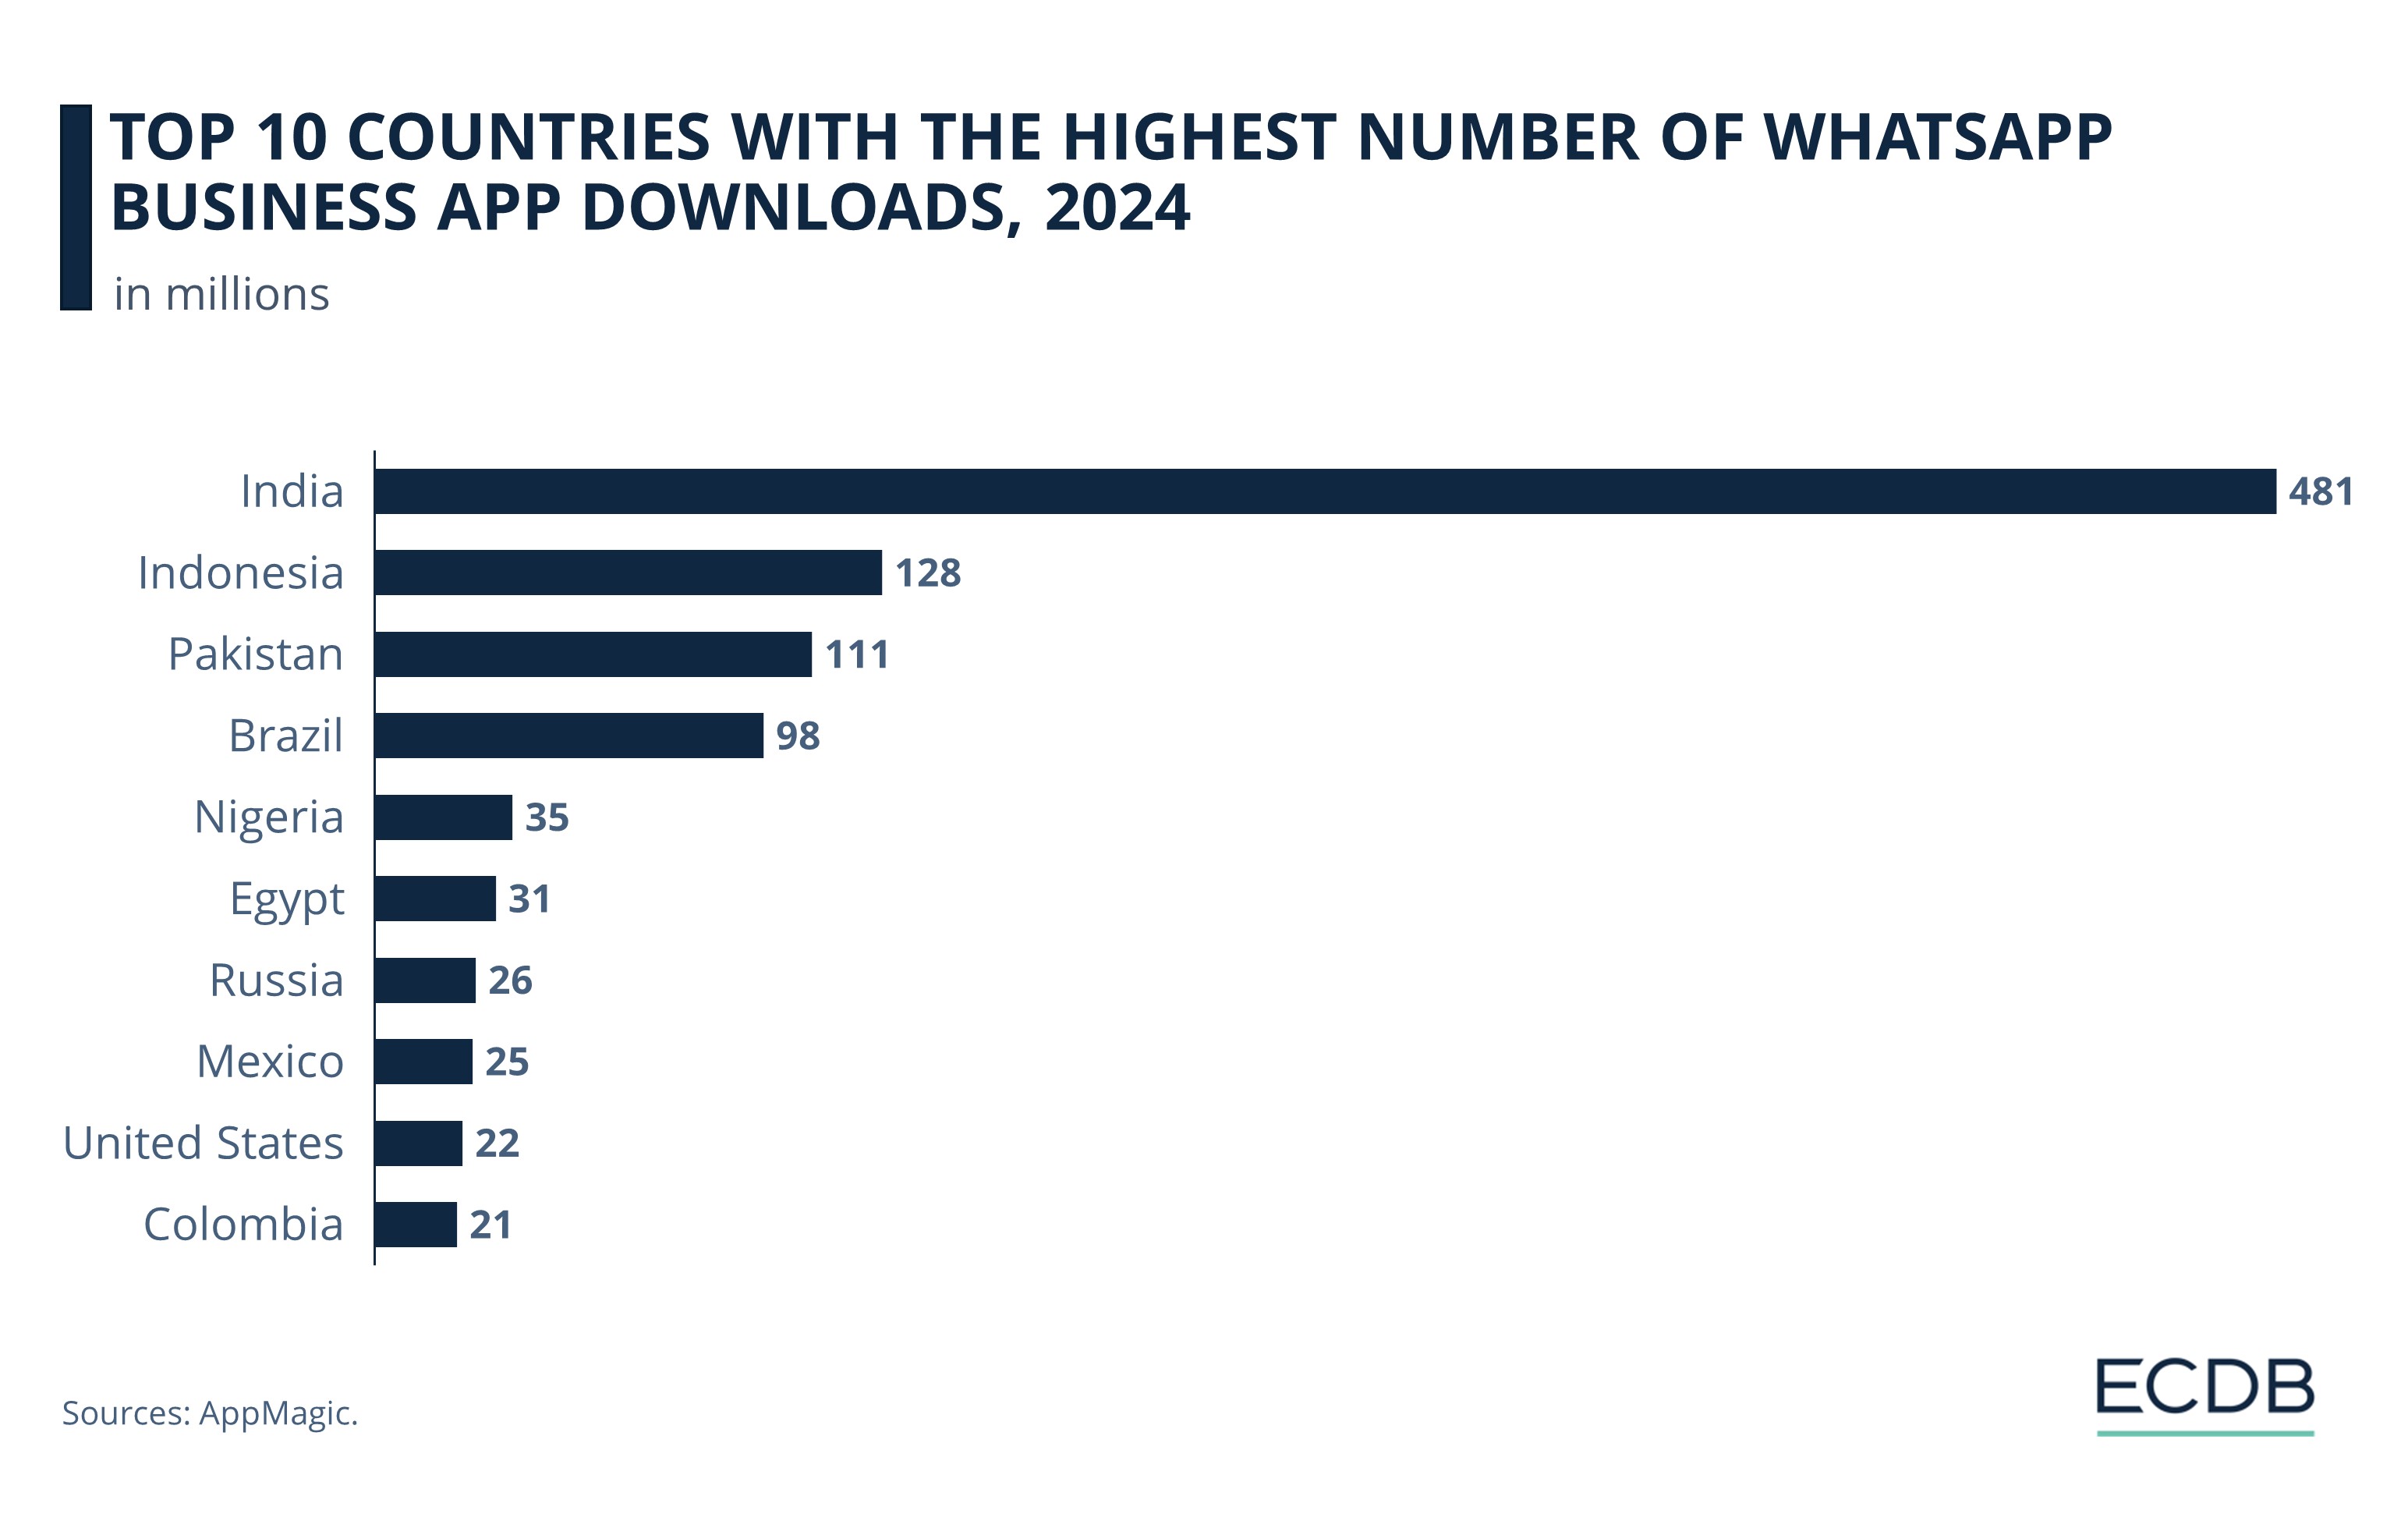 Top 10 Countries with the Highest Number of WhatsApp Business App Downloads, 2024